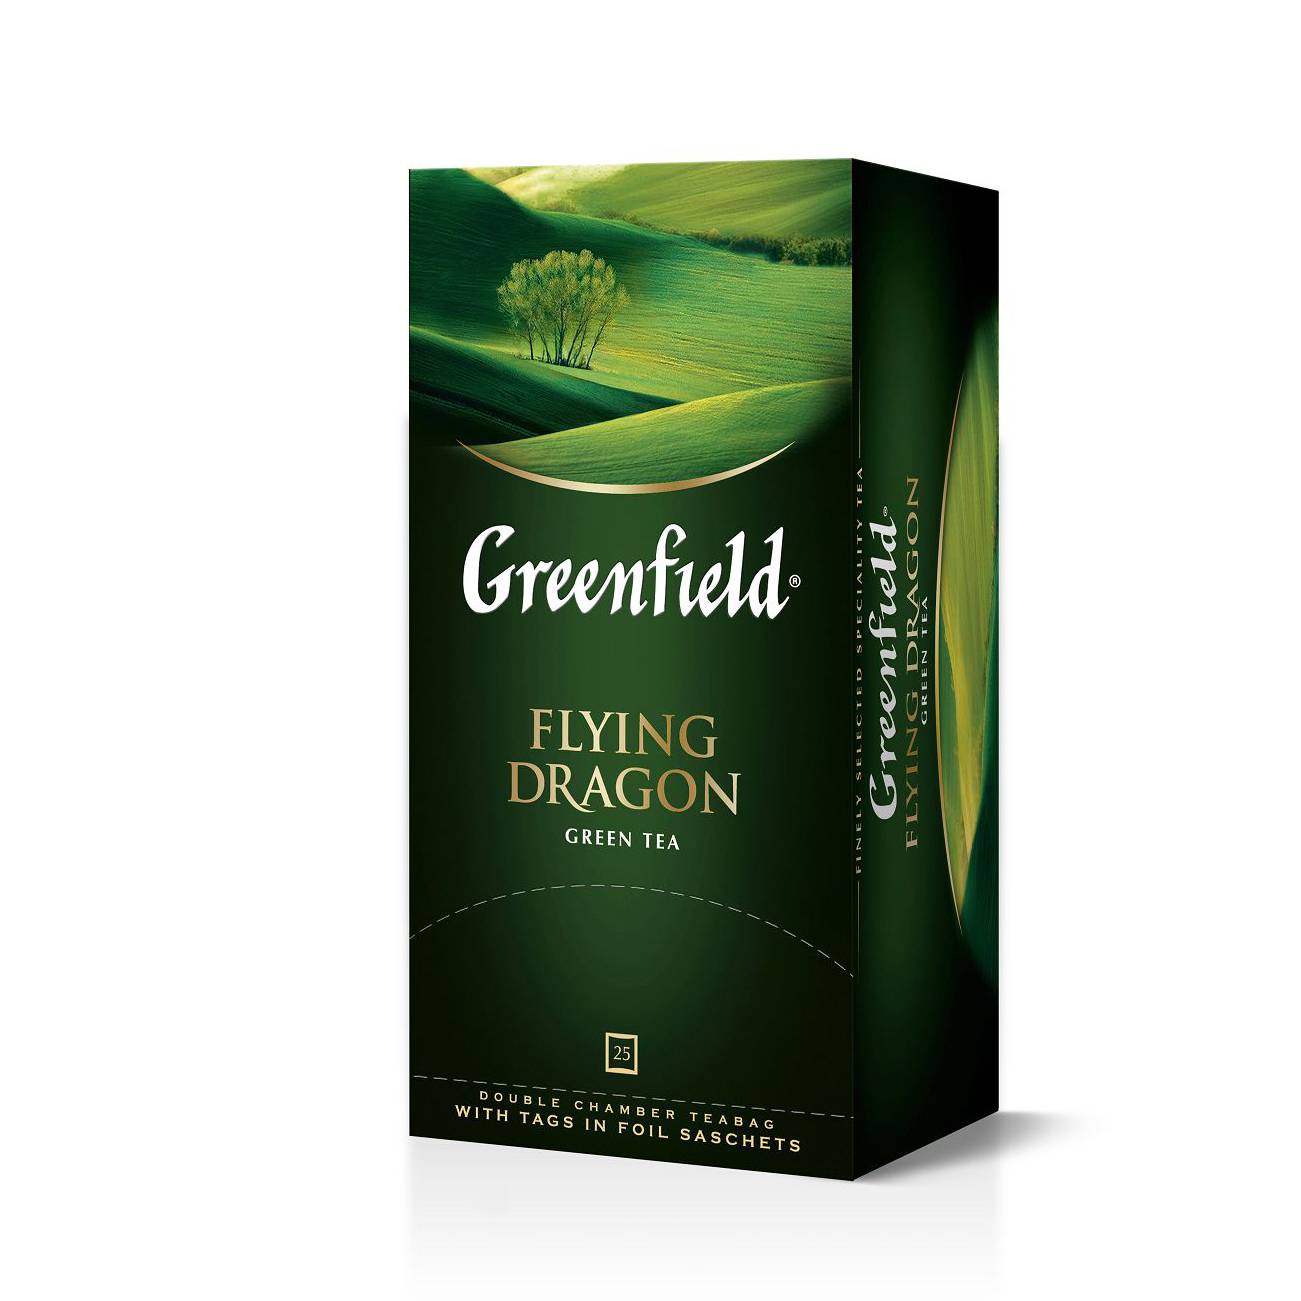 Greenfield Flying Dragon pac image